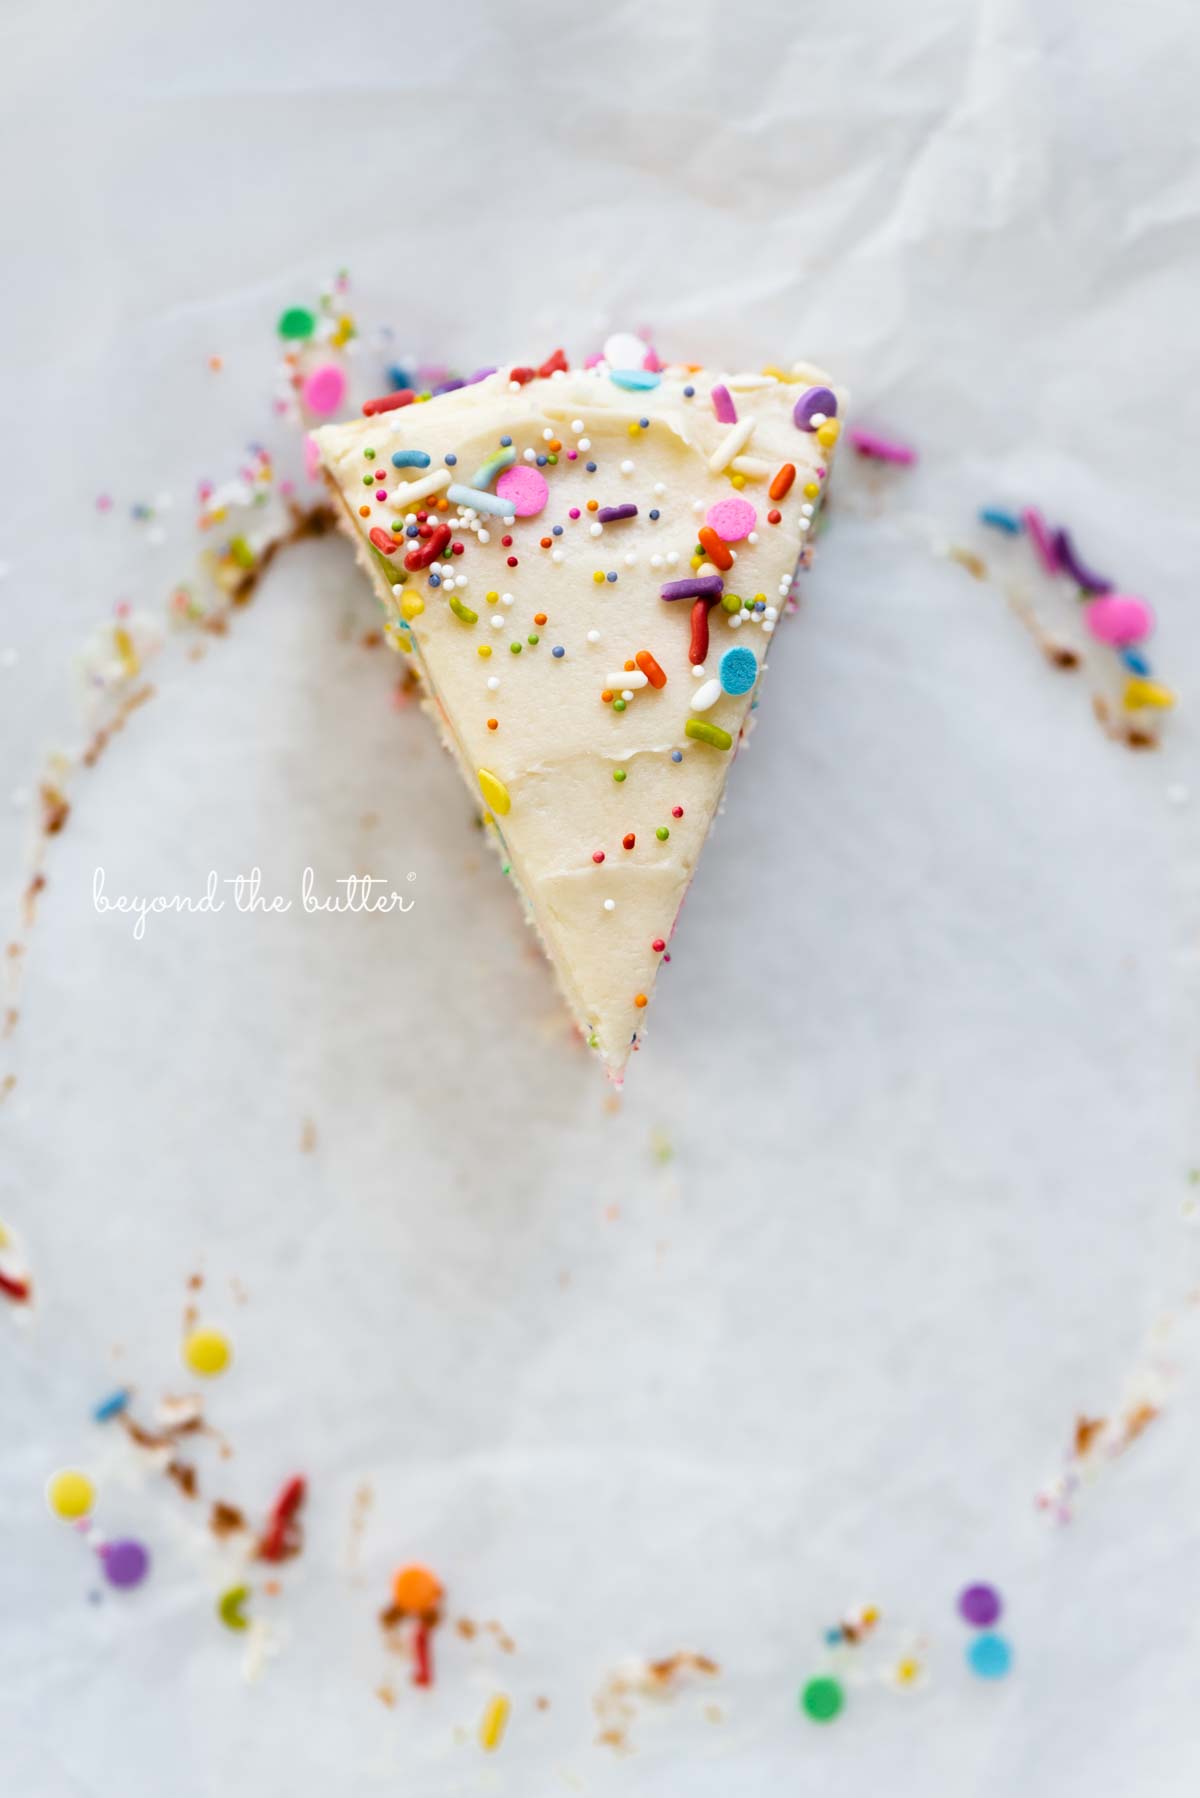 Single slice of 6 inch funfetti cake from BeyondtheButter.com | All images © Beyond the Butter®